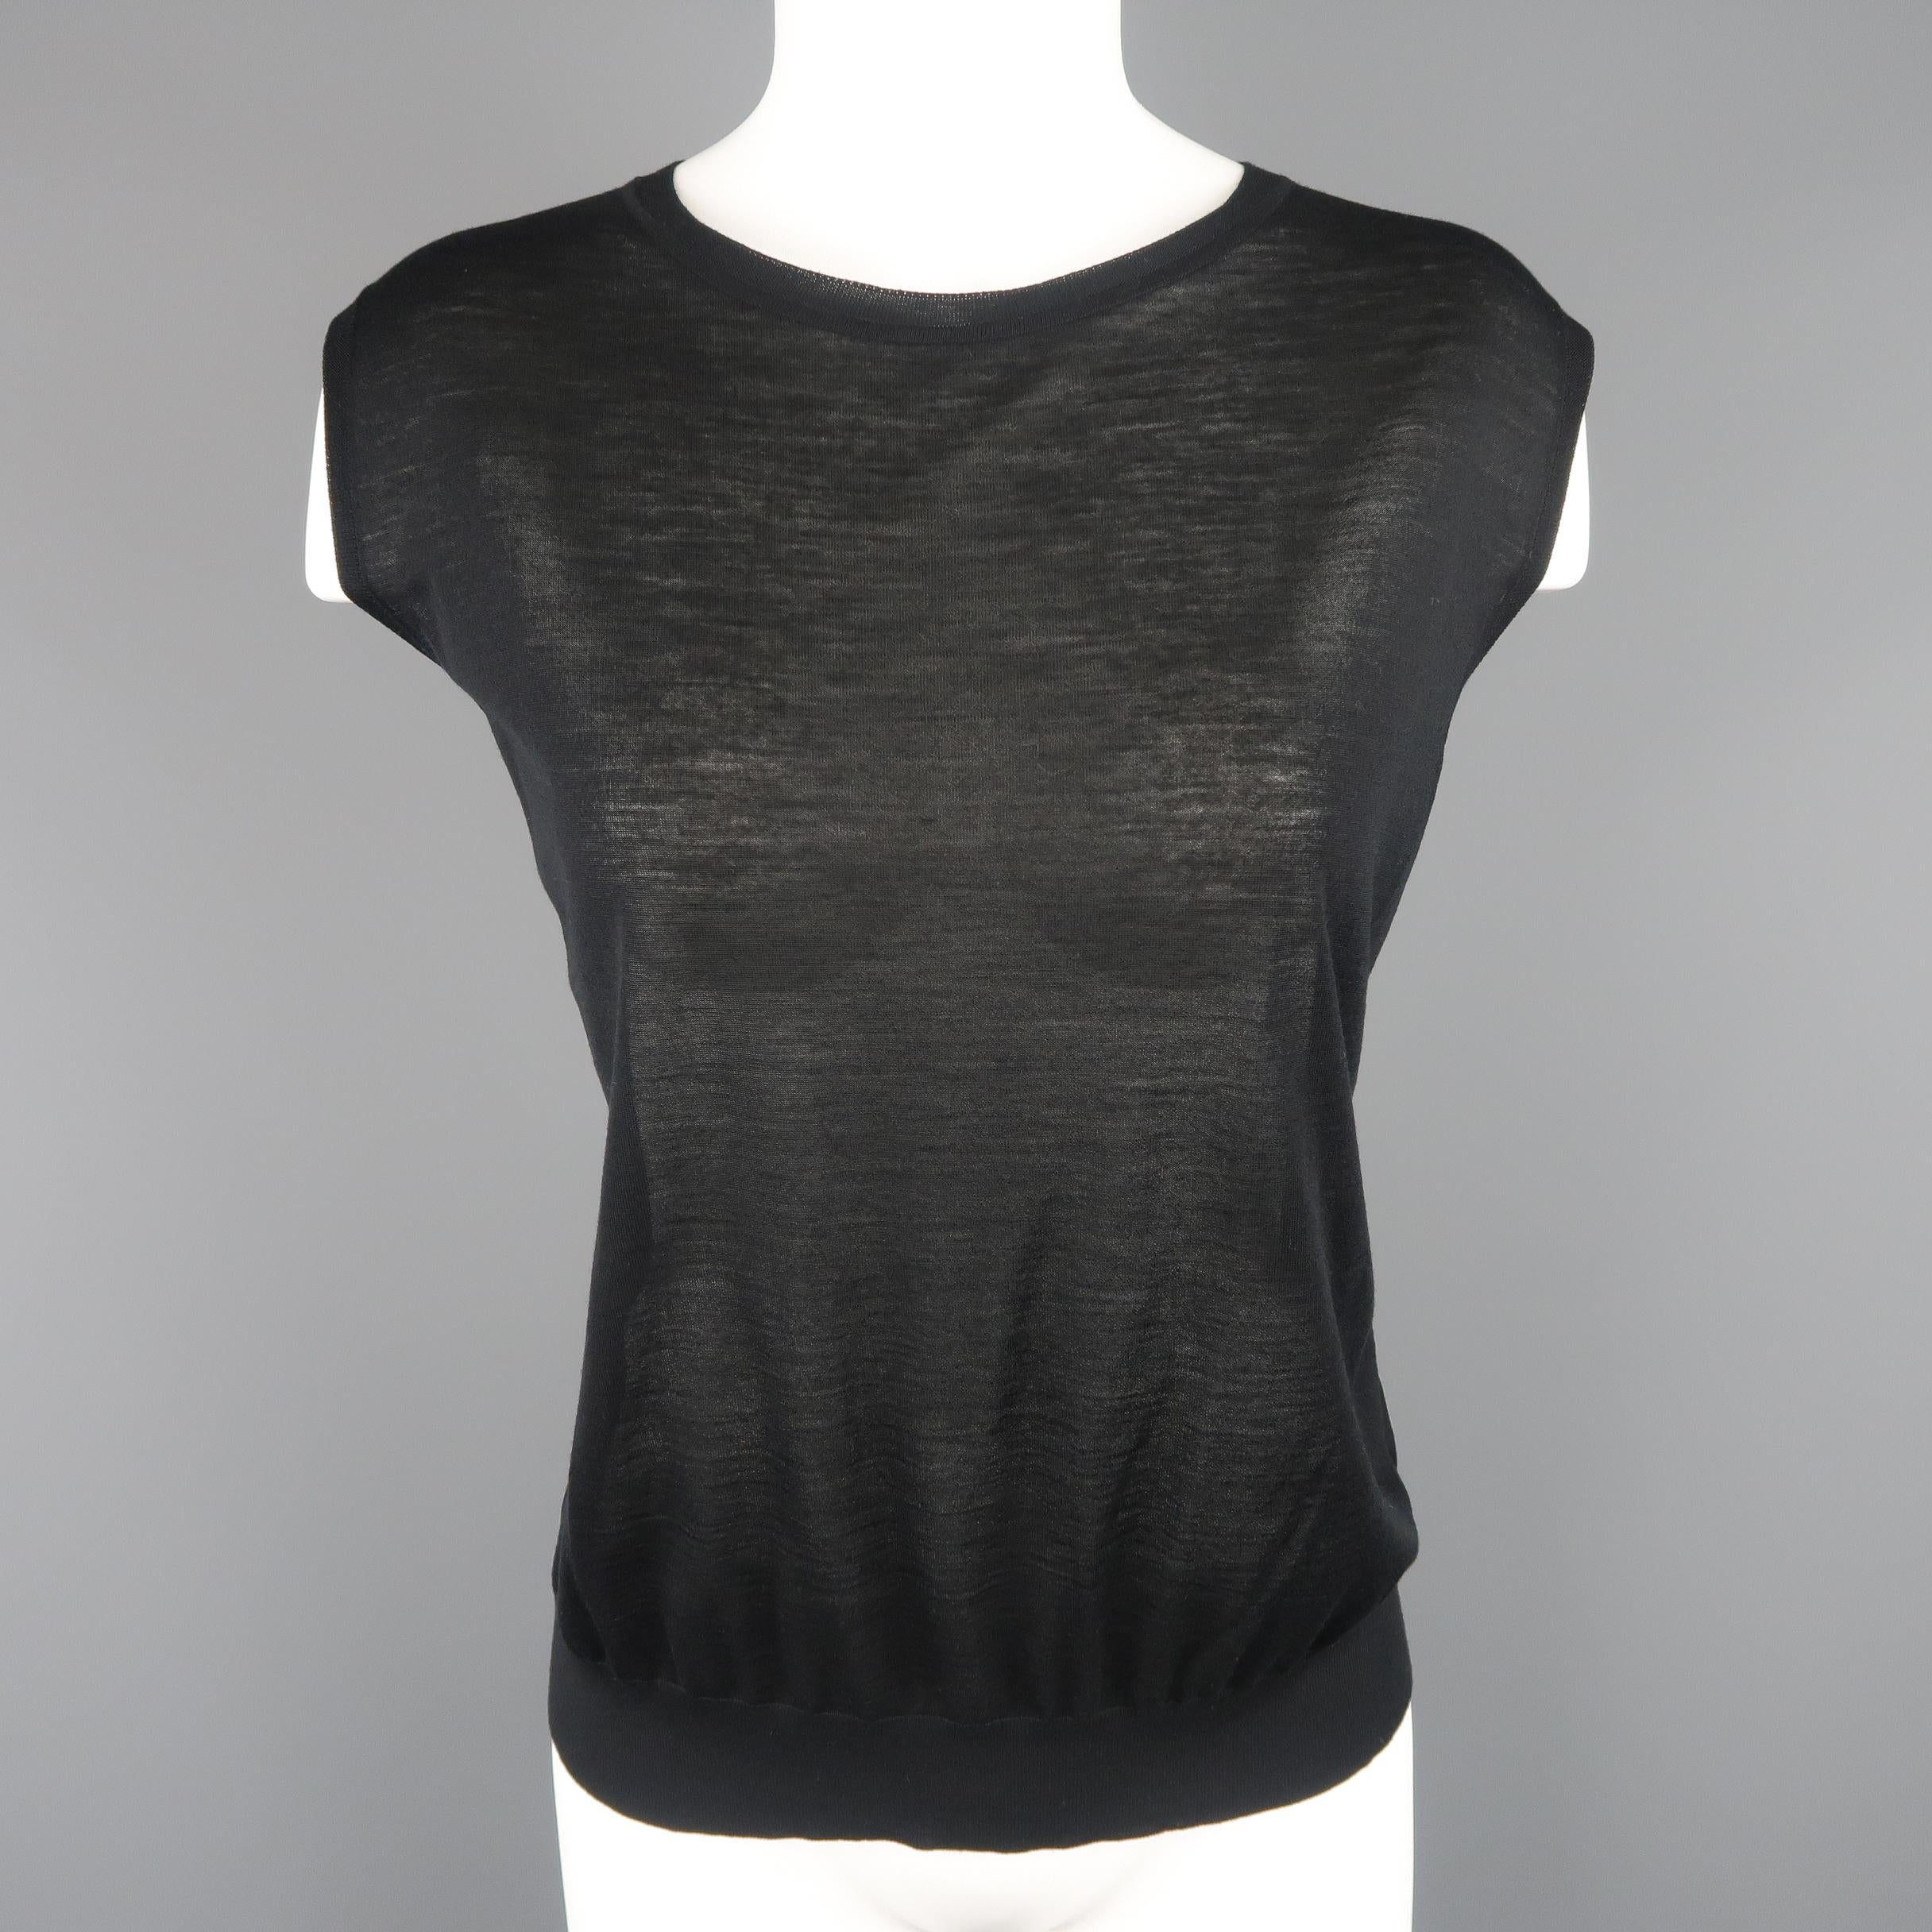 GIORGIO ARMANI sweater set comes in light weight, ultra sheer virgin wool knit and includes a sleeveless pullover and v neck sweater. Made in Italy.
 
Excellent Pre-Owned Condition.
Marked: IT 40
 
Measurements:
 
Top:
Shoulder:17 in.
Bust: 44